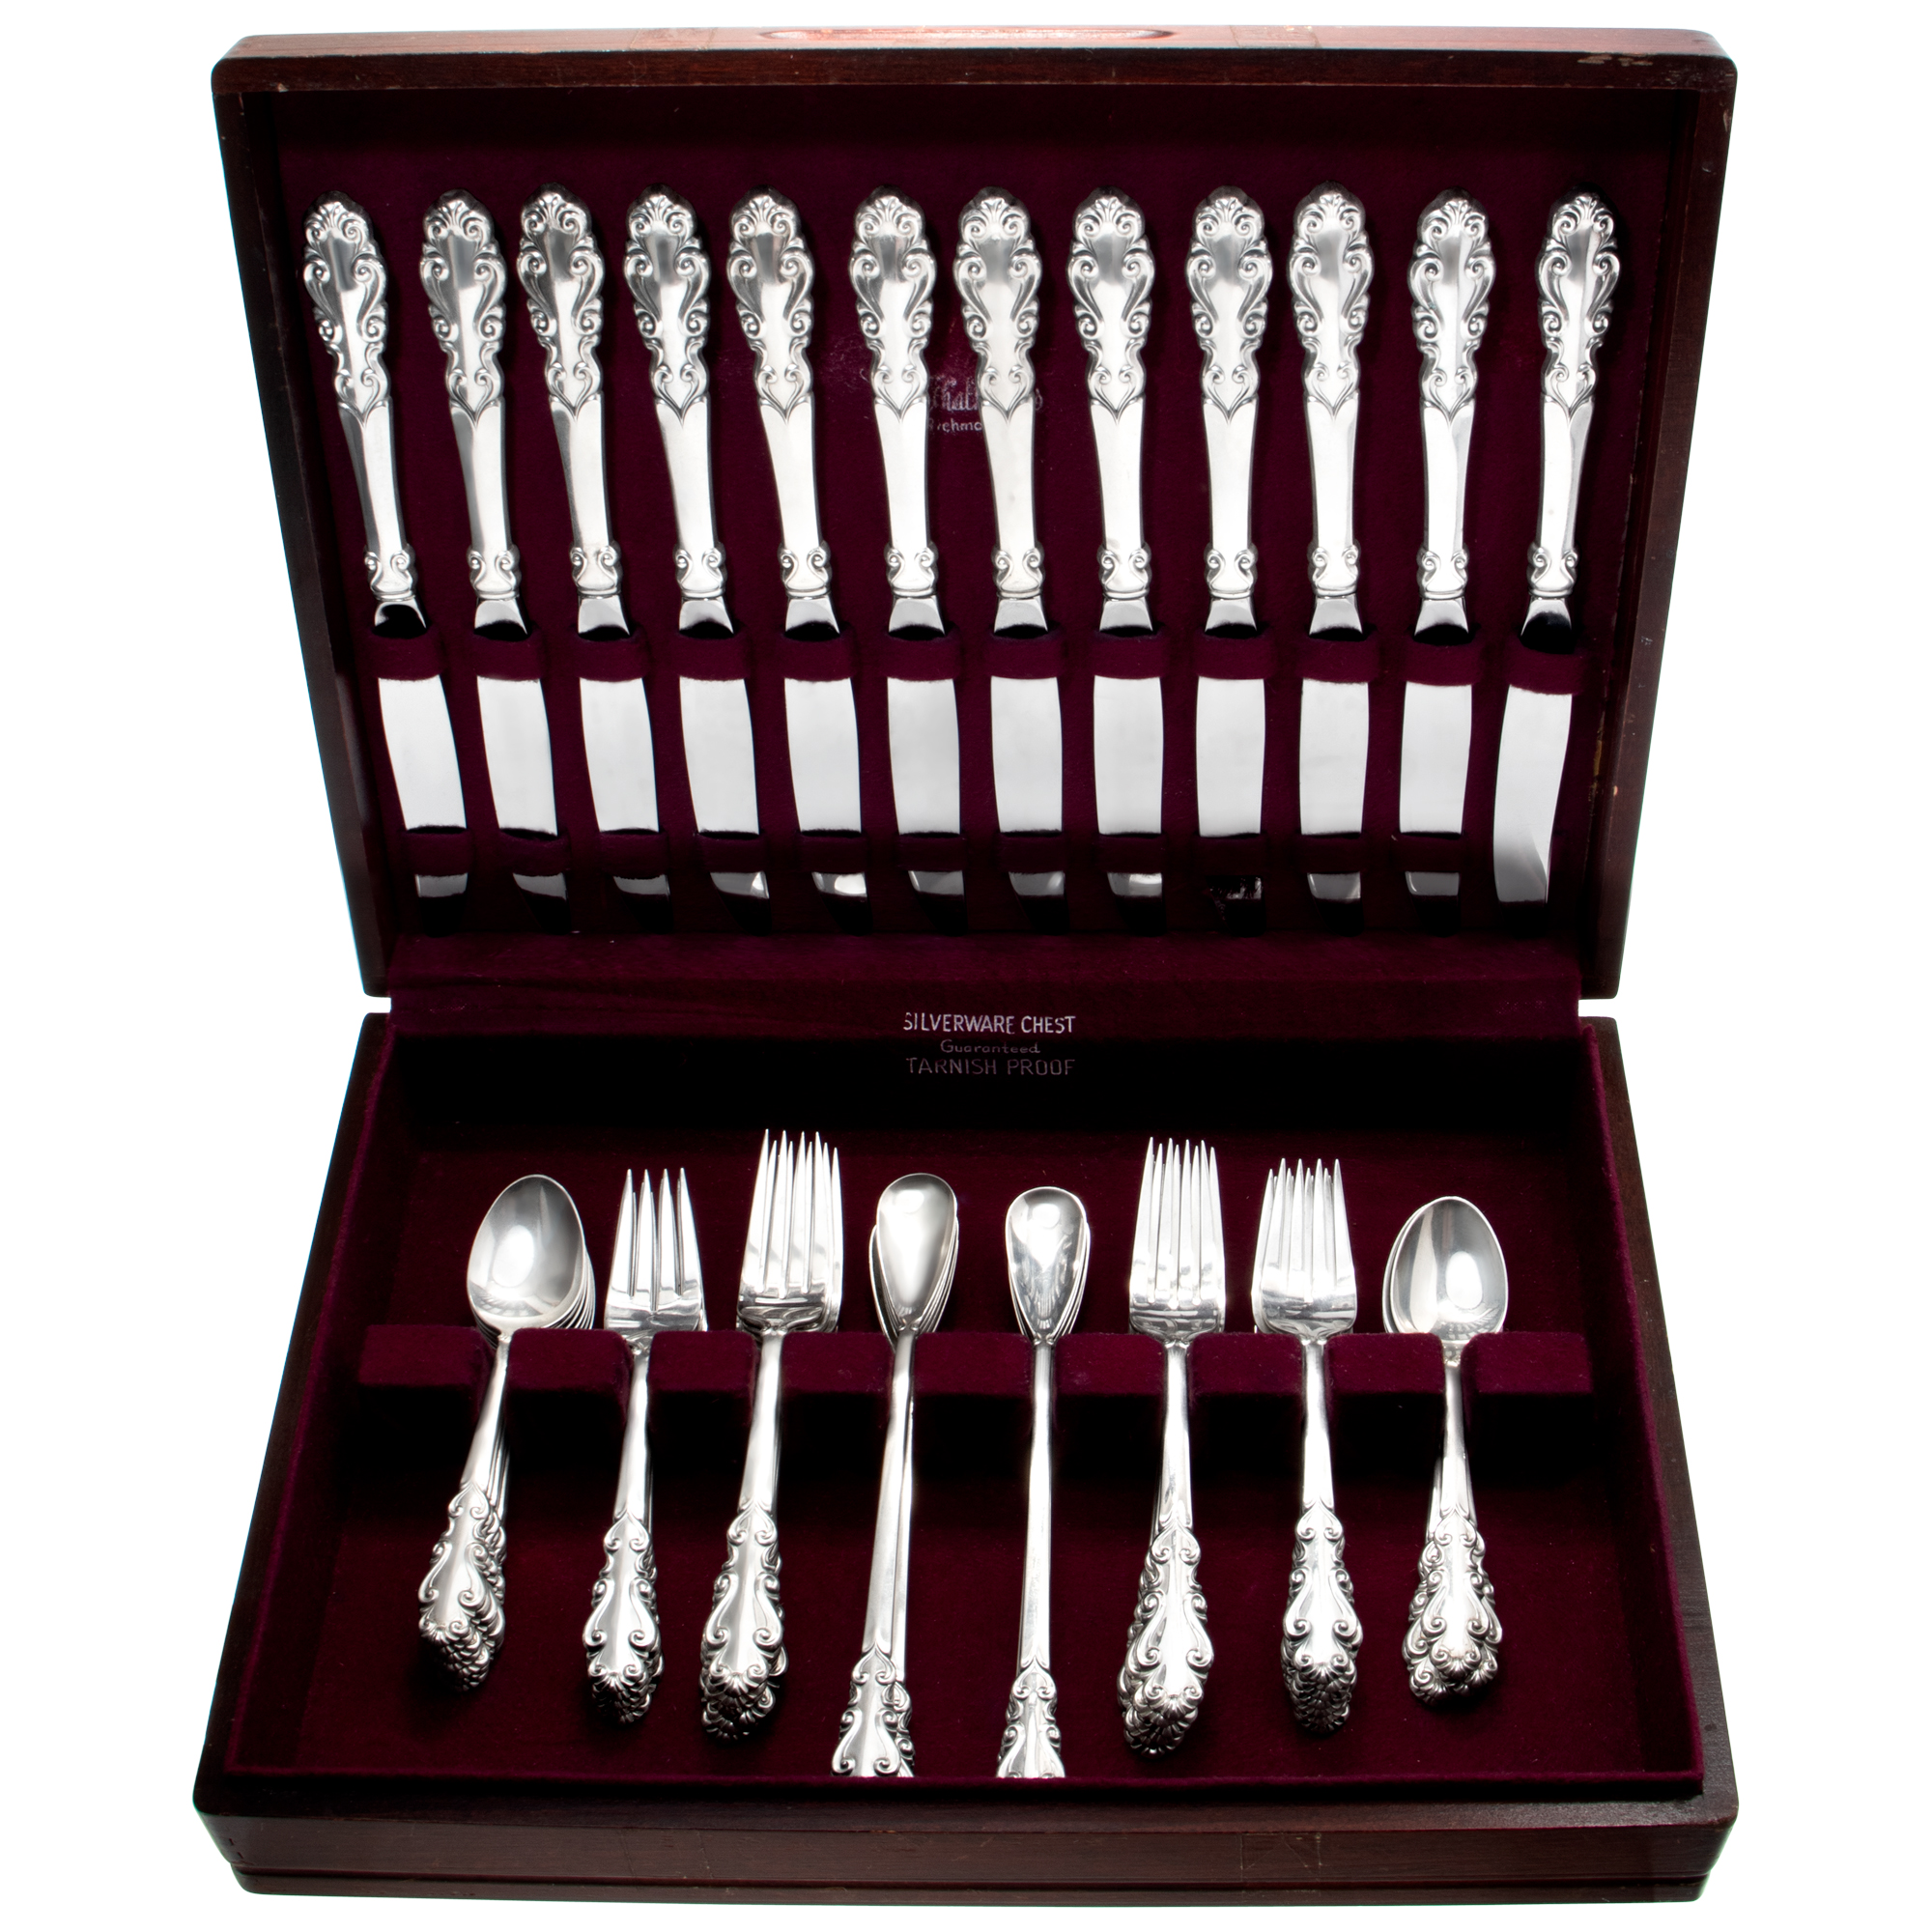 ESPLANADE Sterling silver flatware set patented in 1952 by Towle Silversmiths. 5 place settings for 12-. 66 Pieces total.